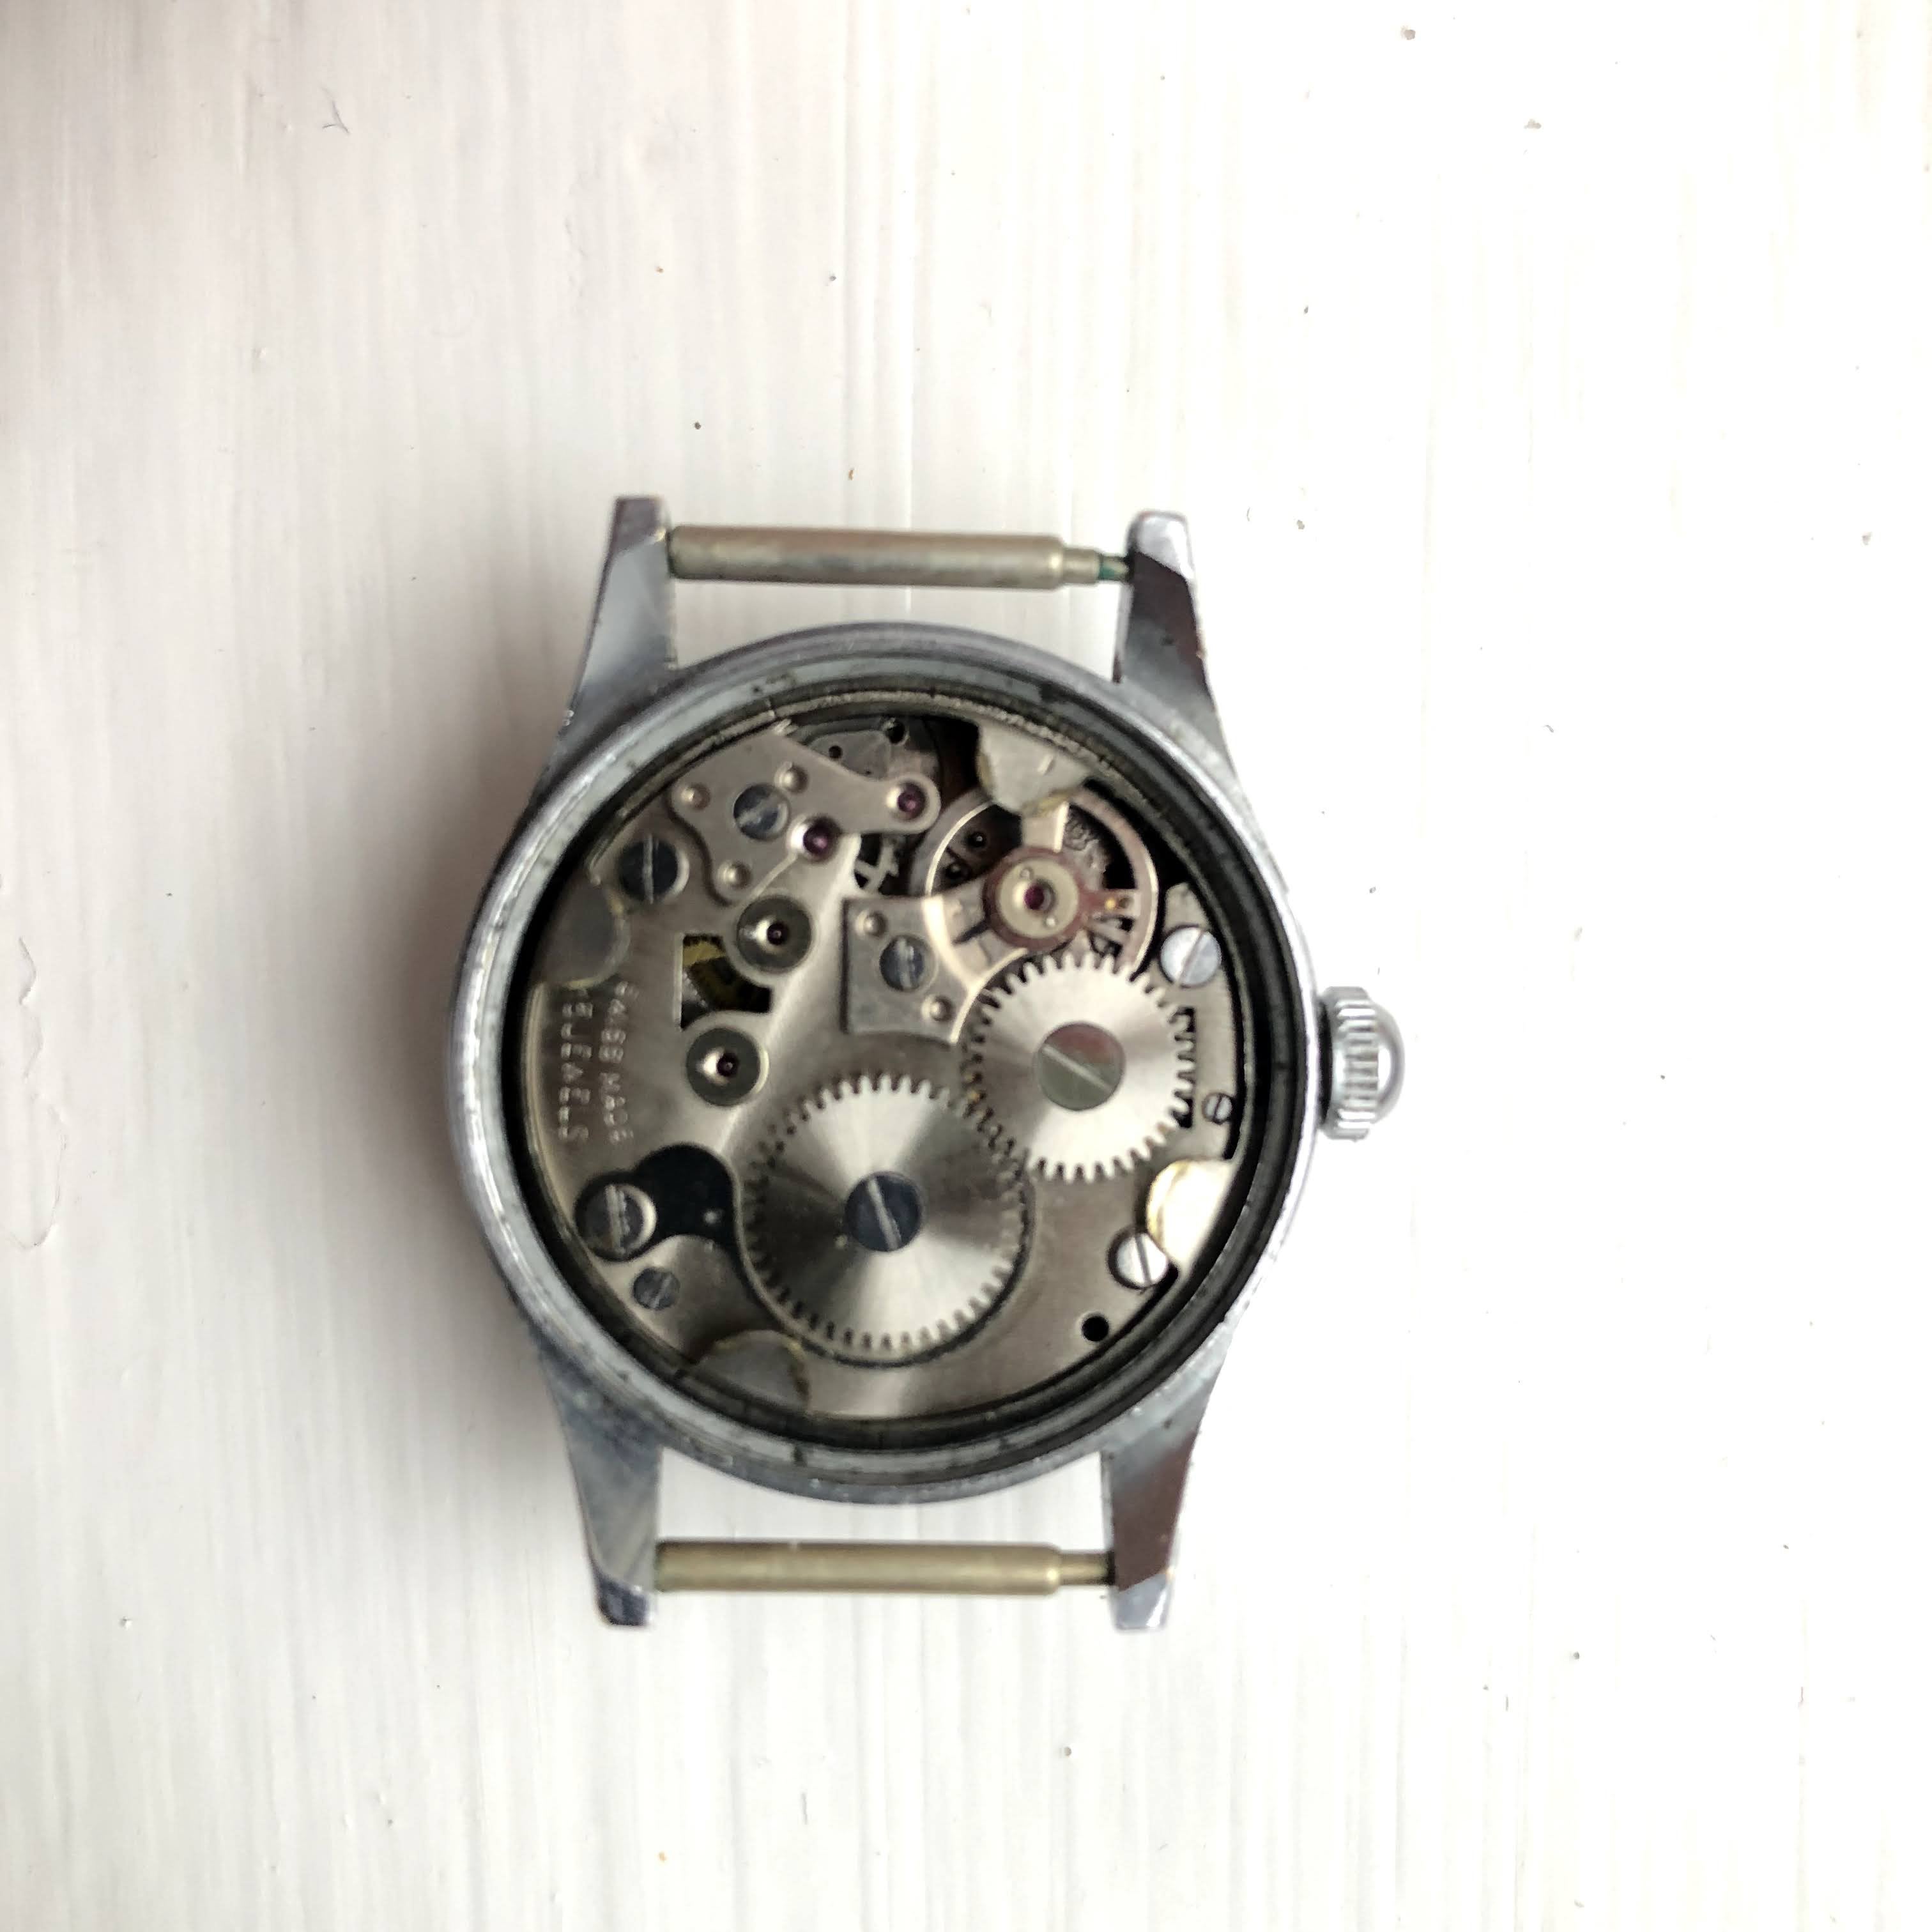 Hour and minute hand stopped moving, second hand is moving, hour and minute hand  moving when setting watch. | WatchUSeek Watch Forums